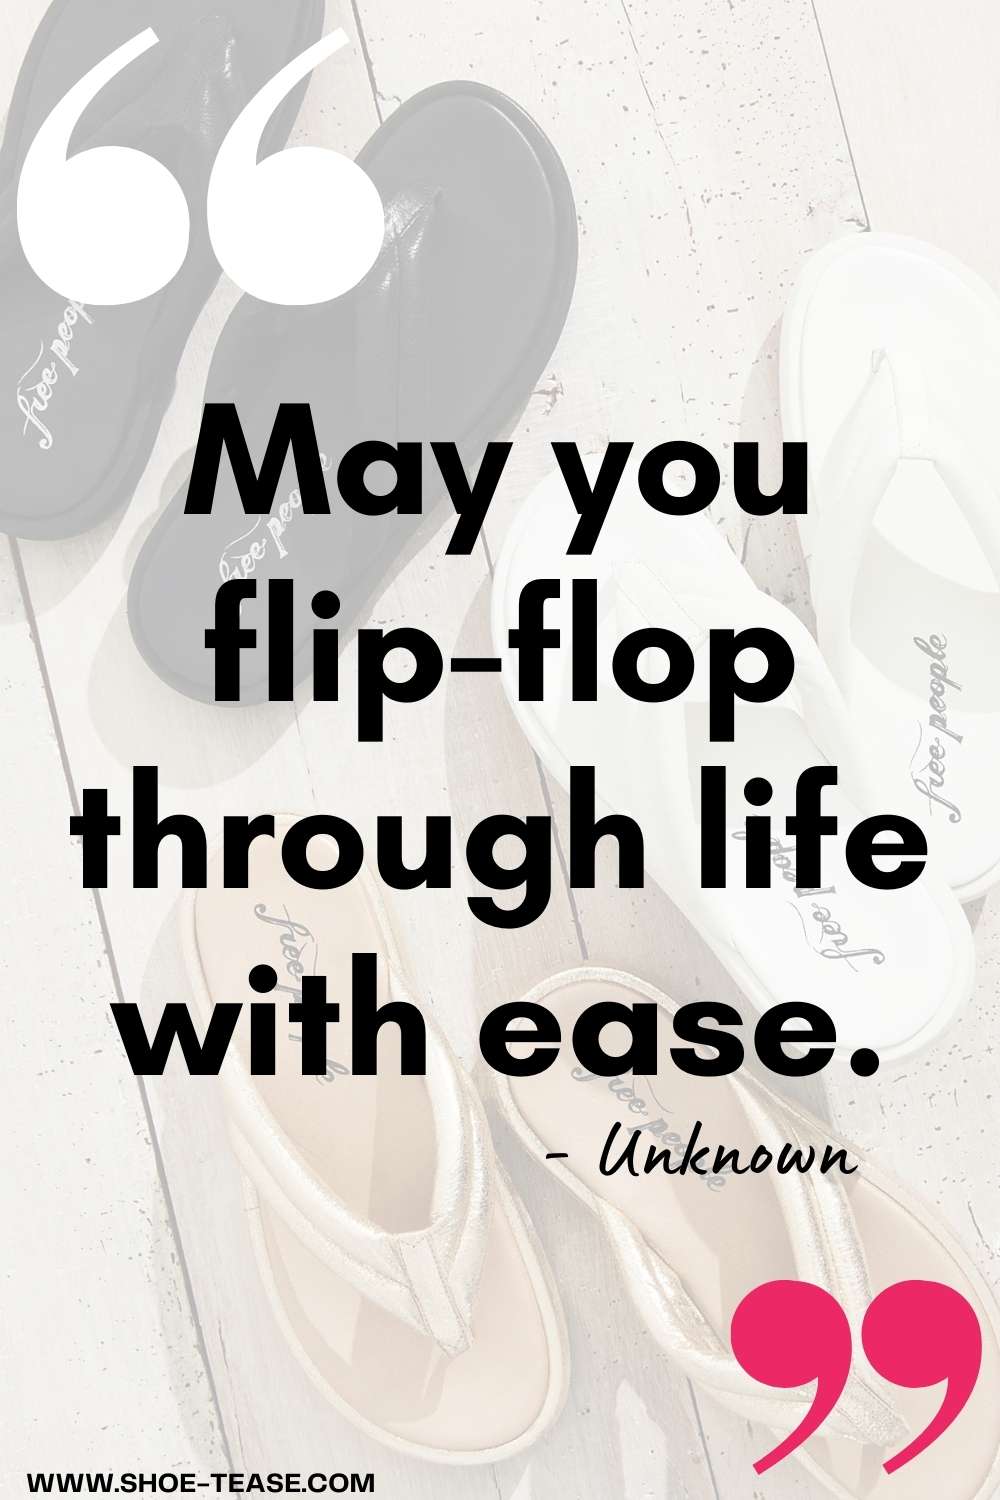 Flip flop quote reading may you flip flop through life with ease unknown over faded image of flip flops.